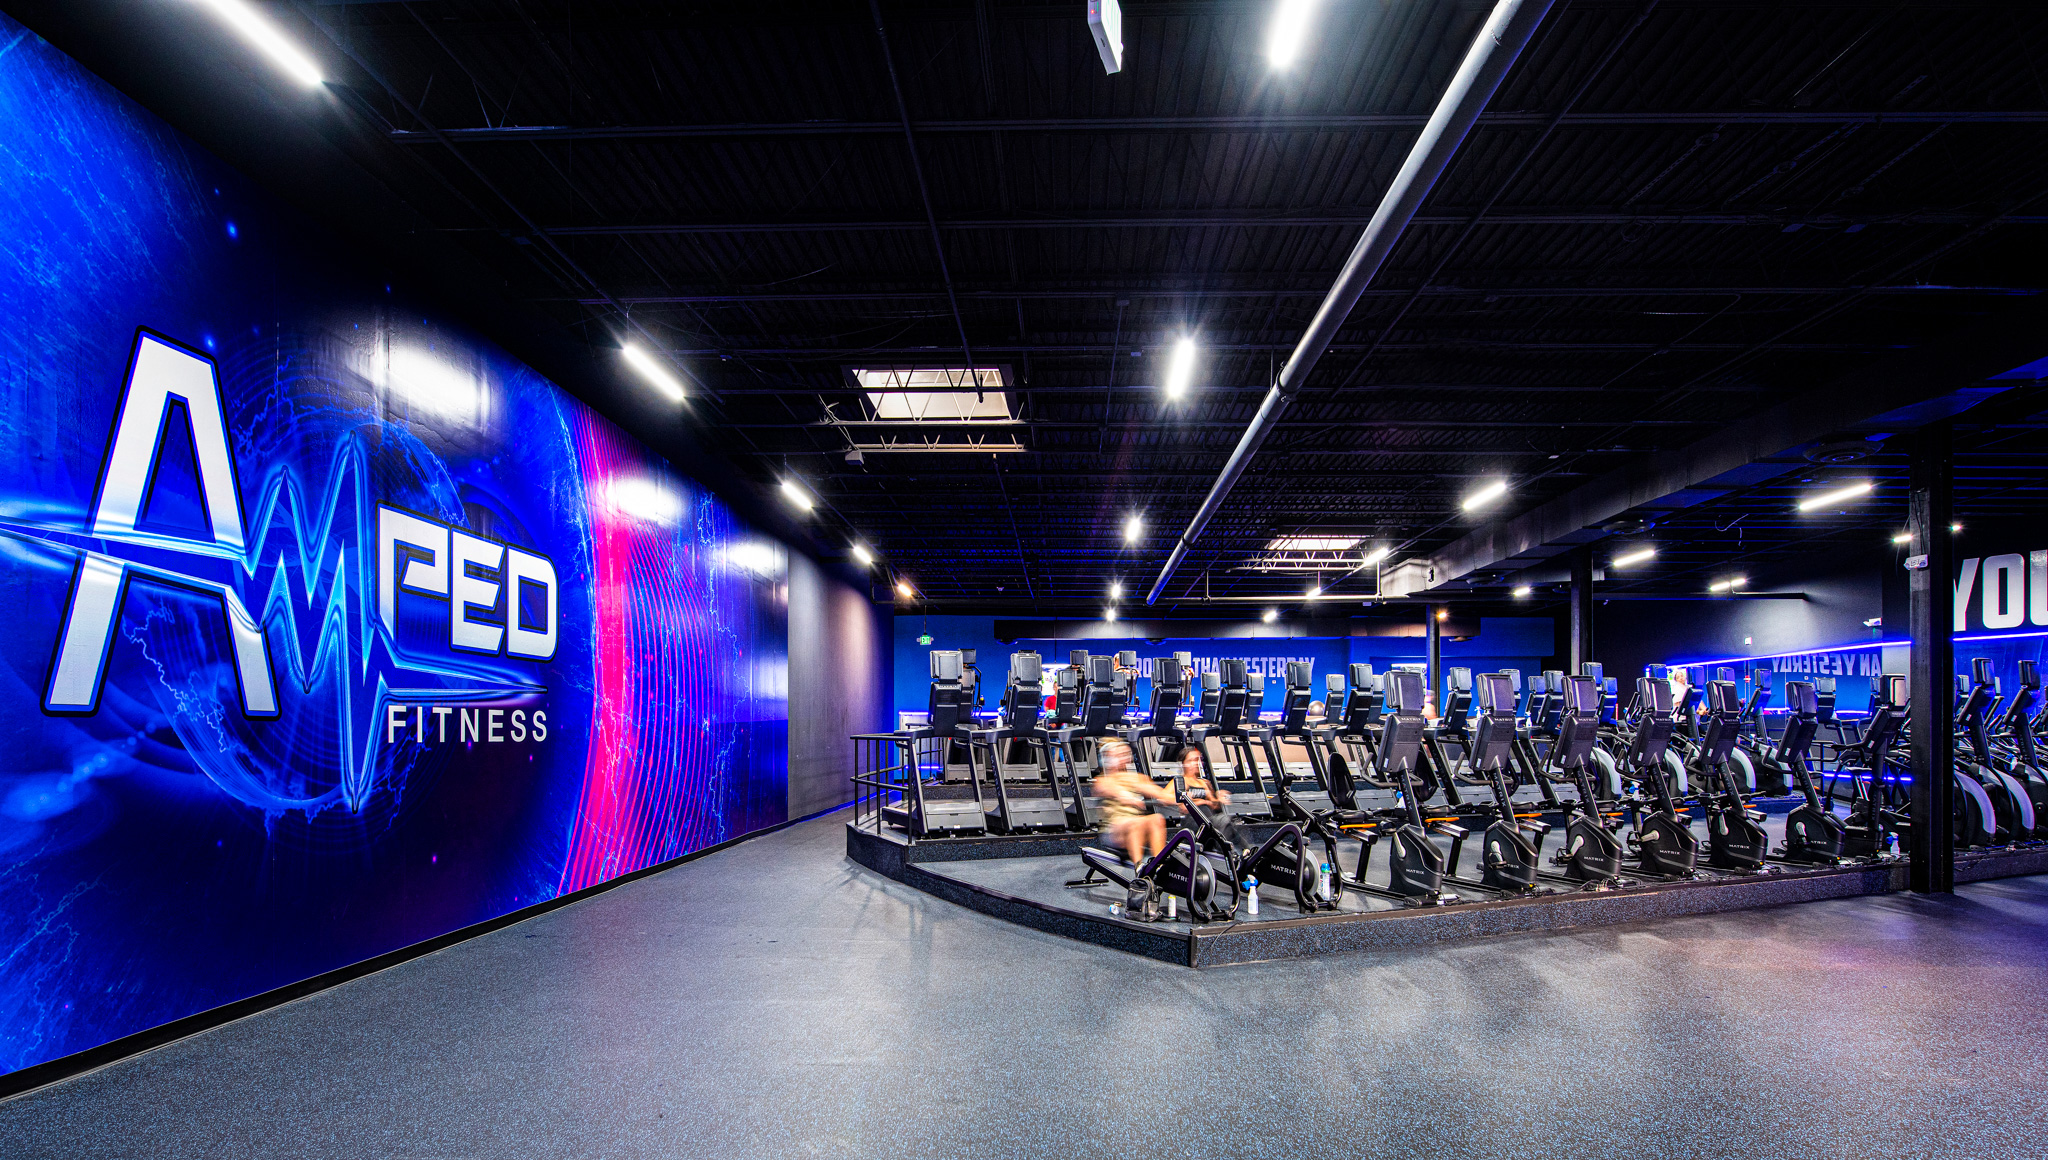 Amped Fitness is one of four new tenants at Marketplace at Altamonte in the last year